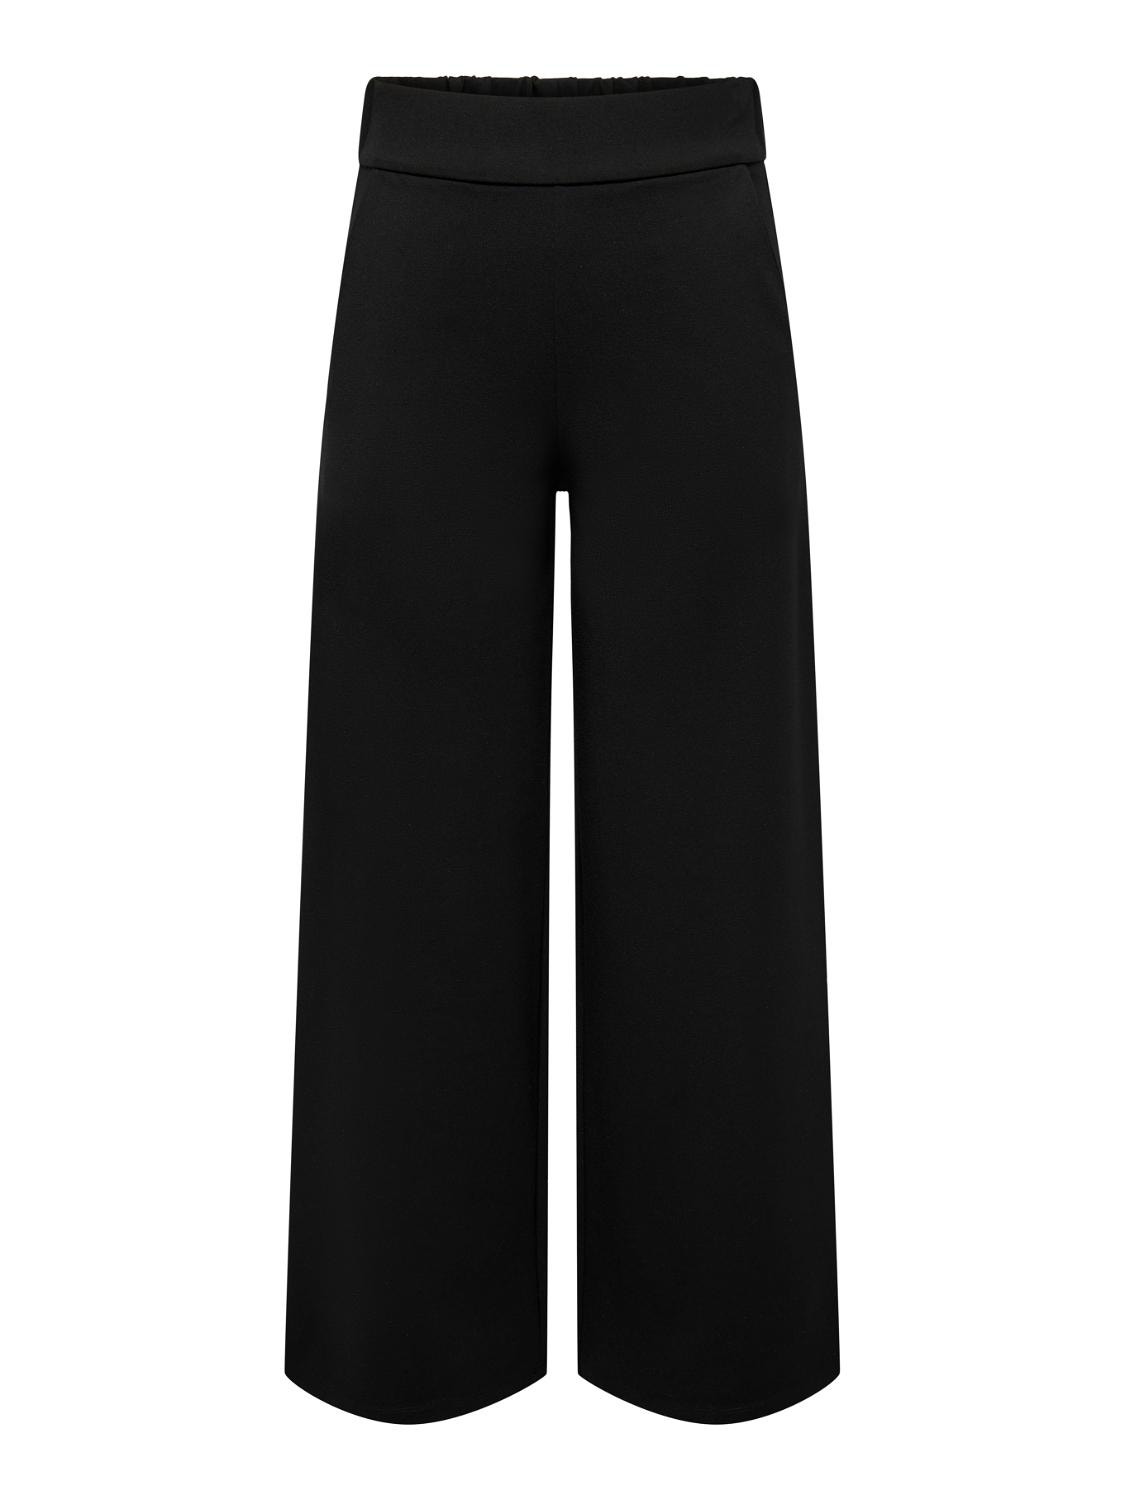 ONLY Trousers with high waist -Black - 15302855